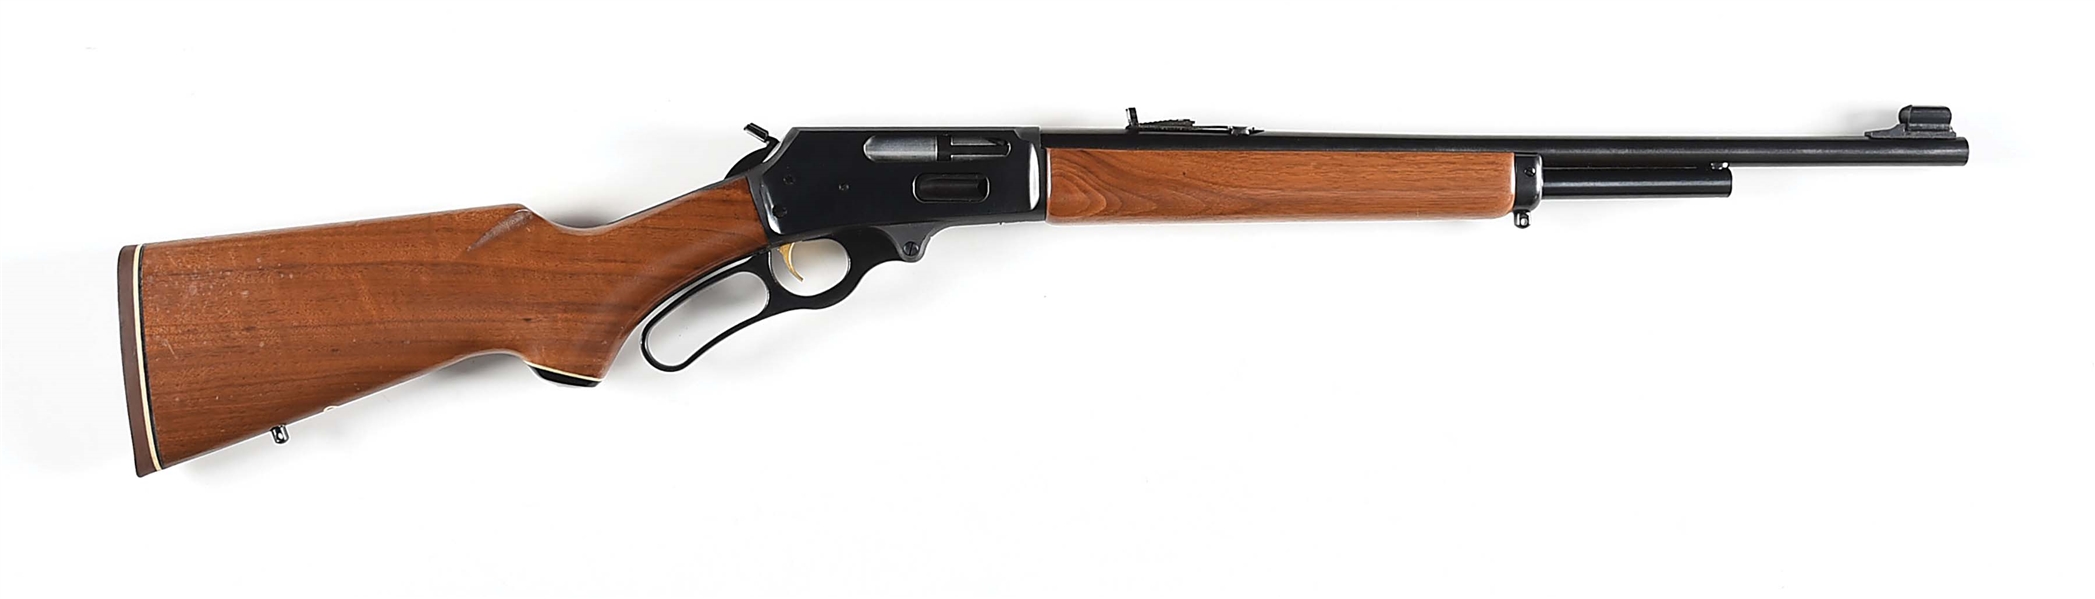 (M) MARLIN 375 LEVER ACTION RIFLE.